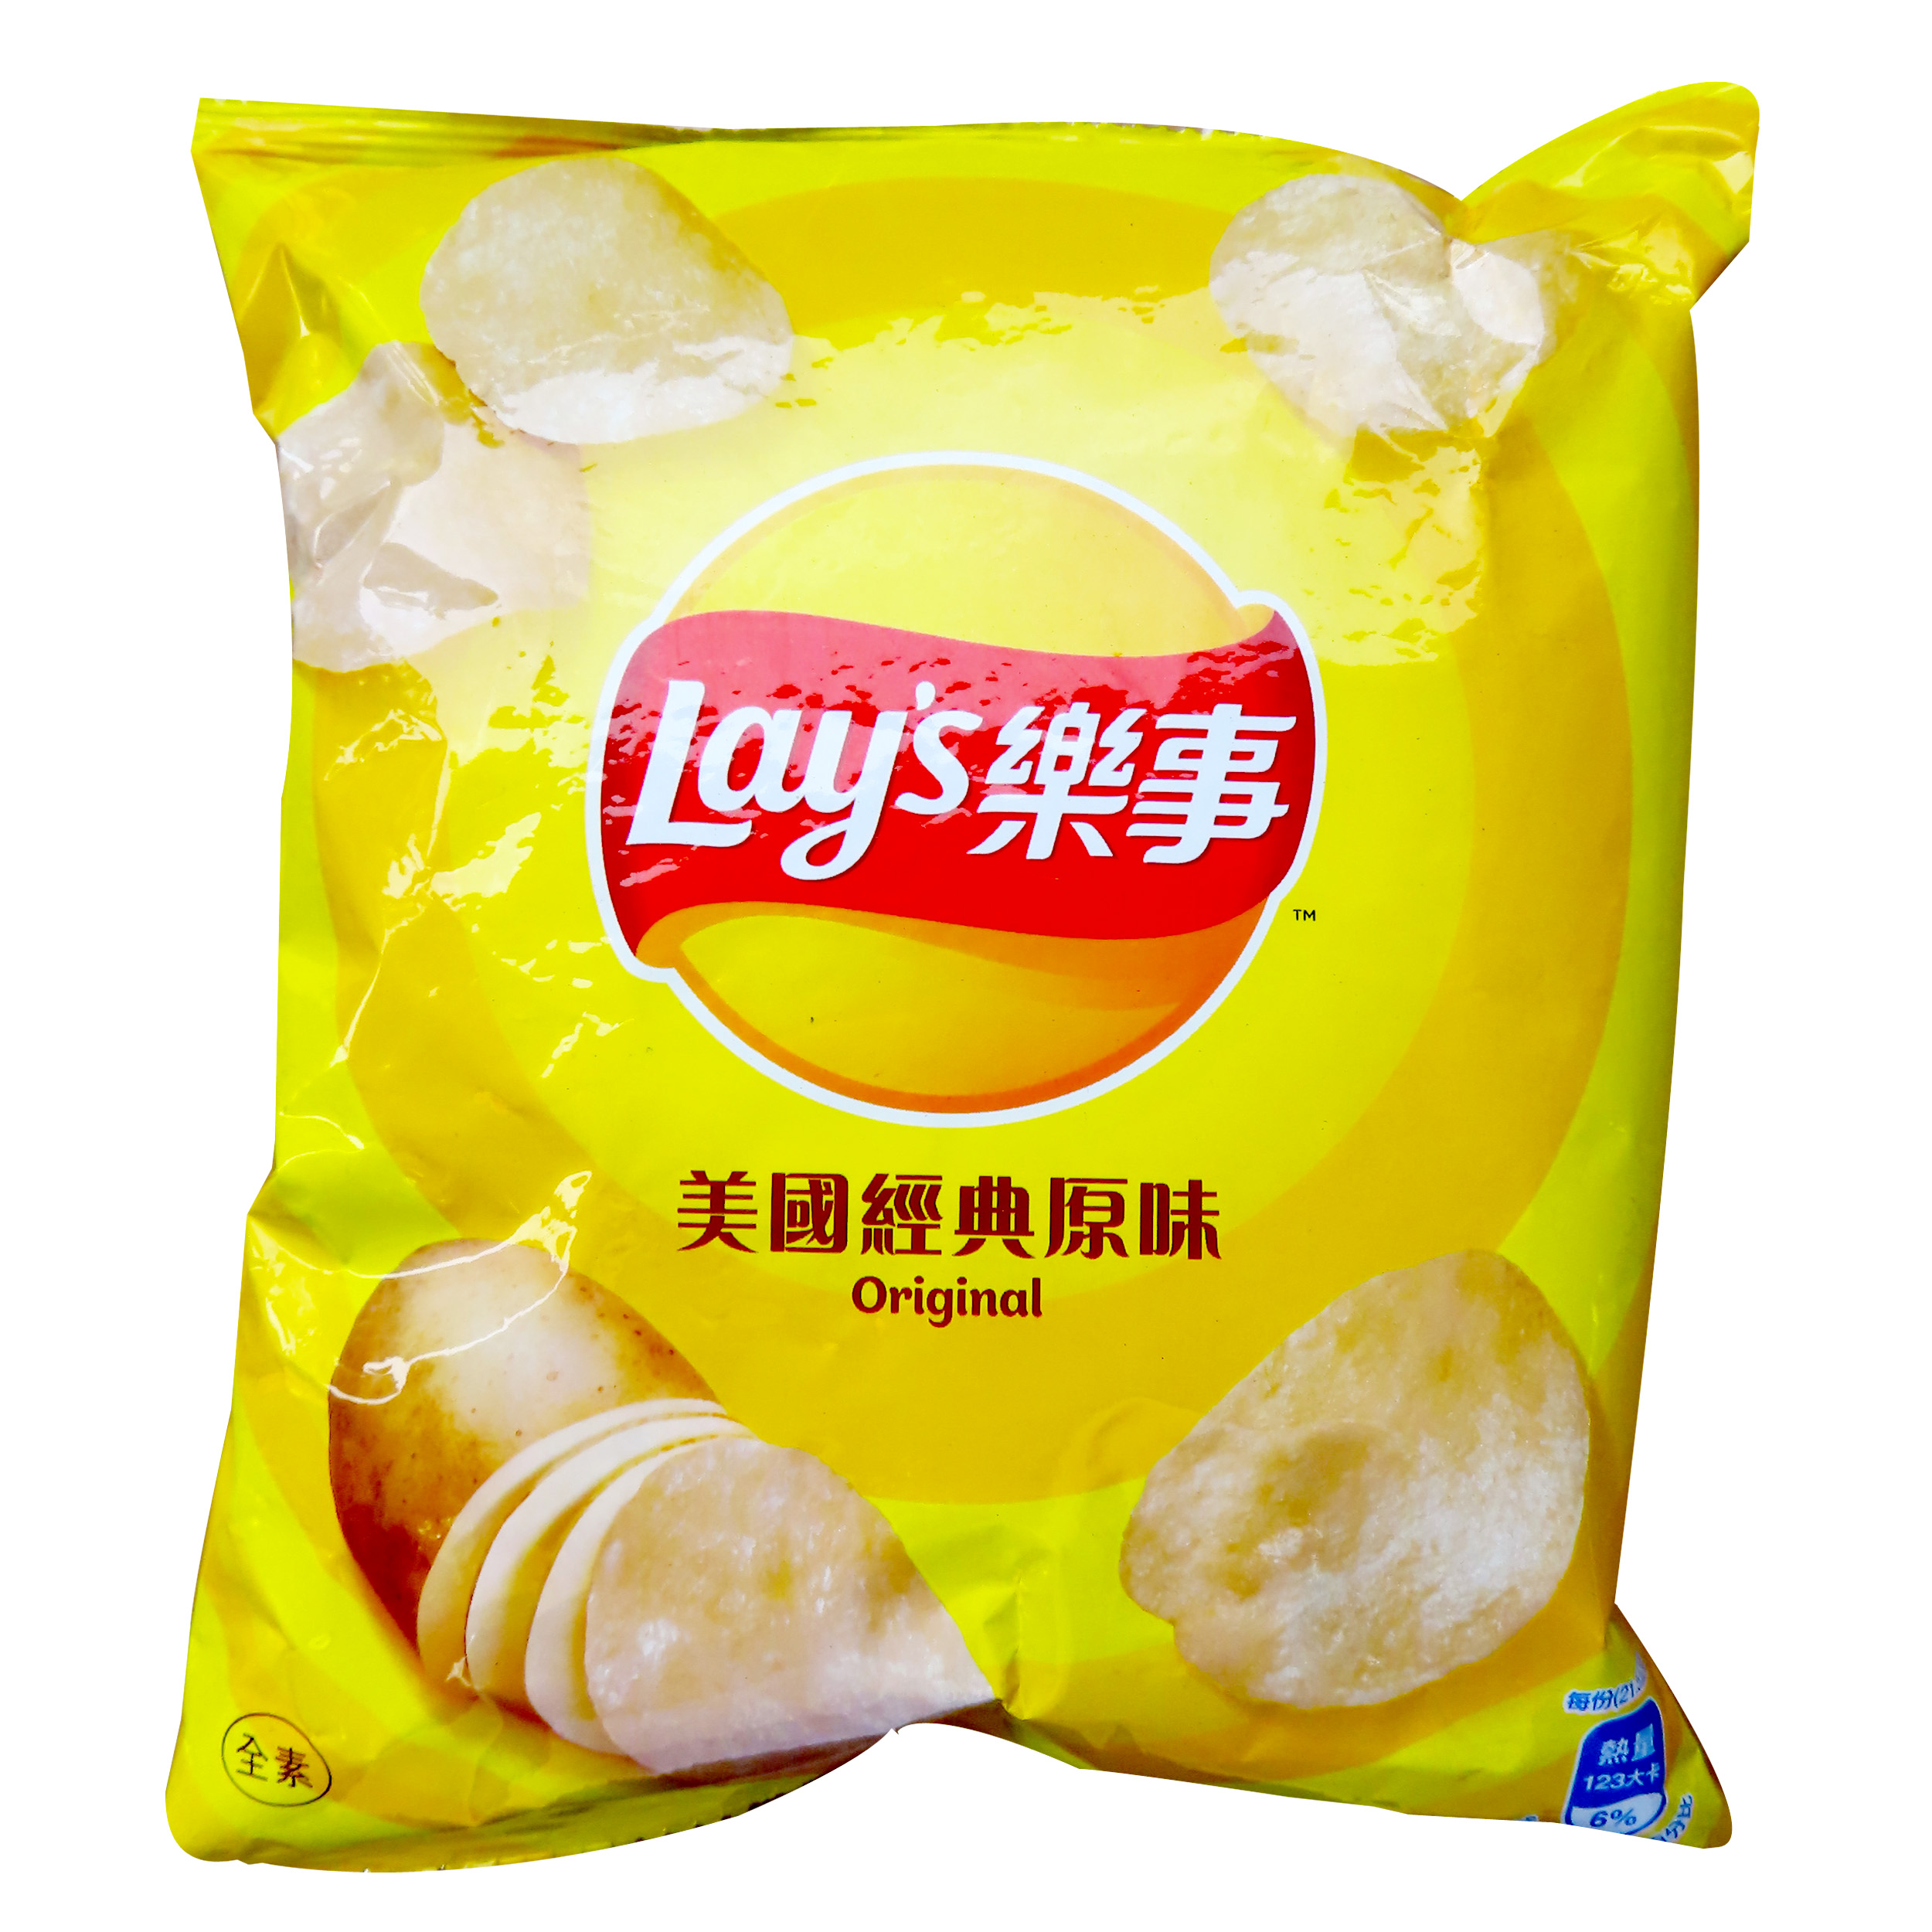 Image Lays Chips 乐事 - 洋芋片34 grams